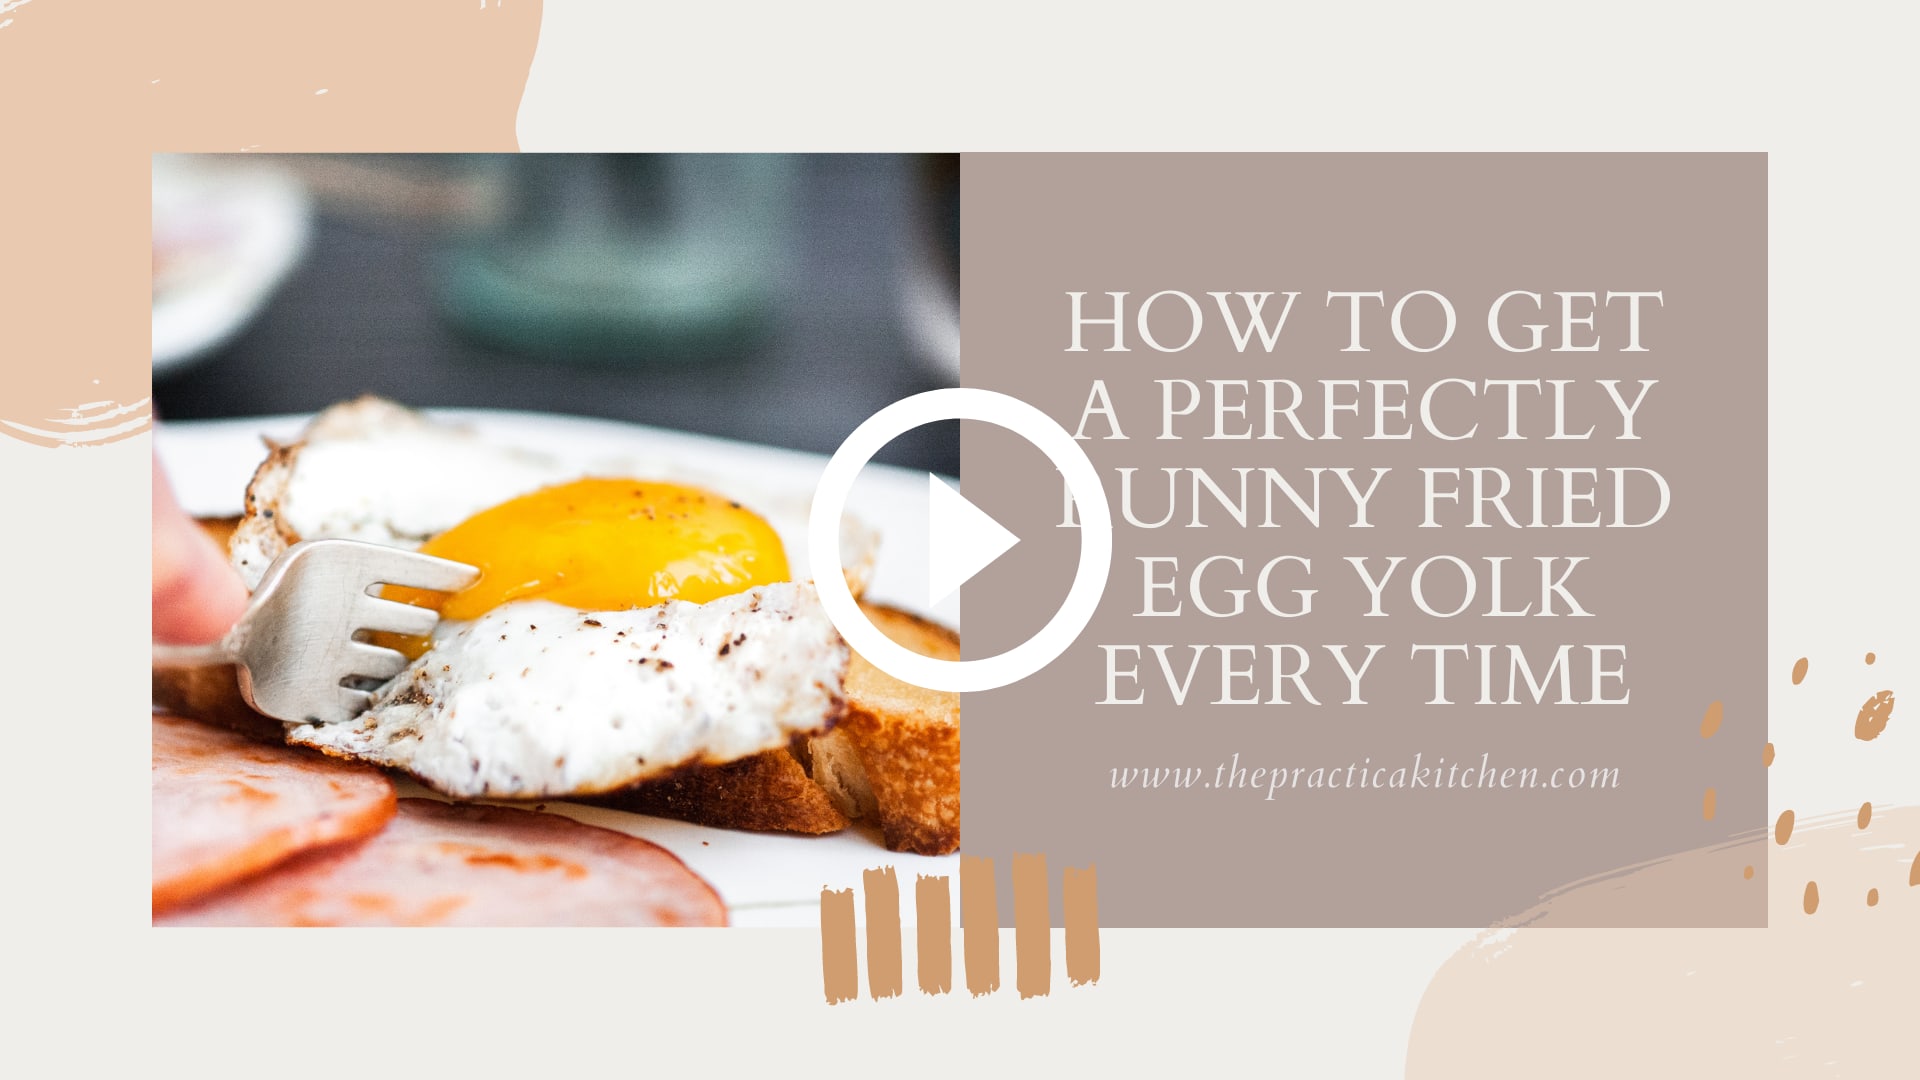 Fried Egg with Perfect Runny Egg Yolk » the practical kitchen